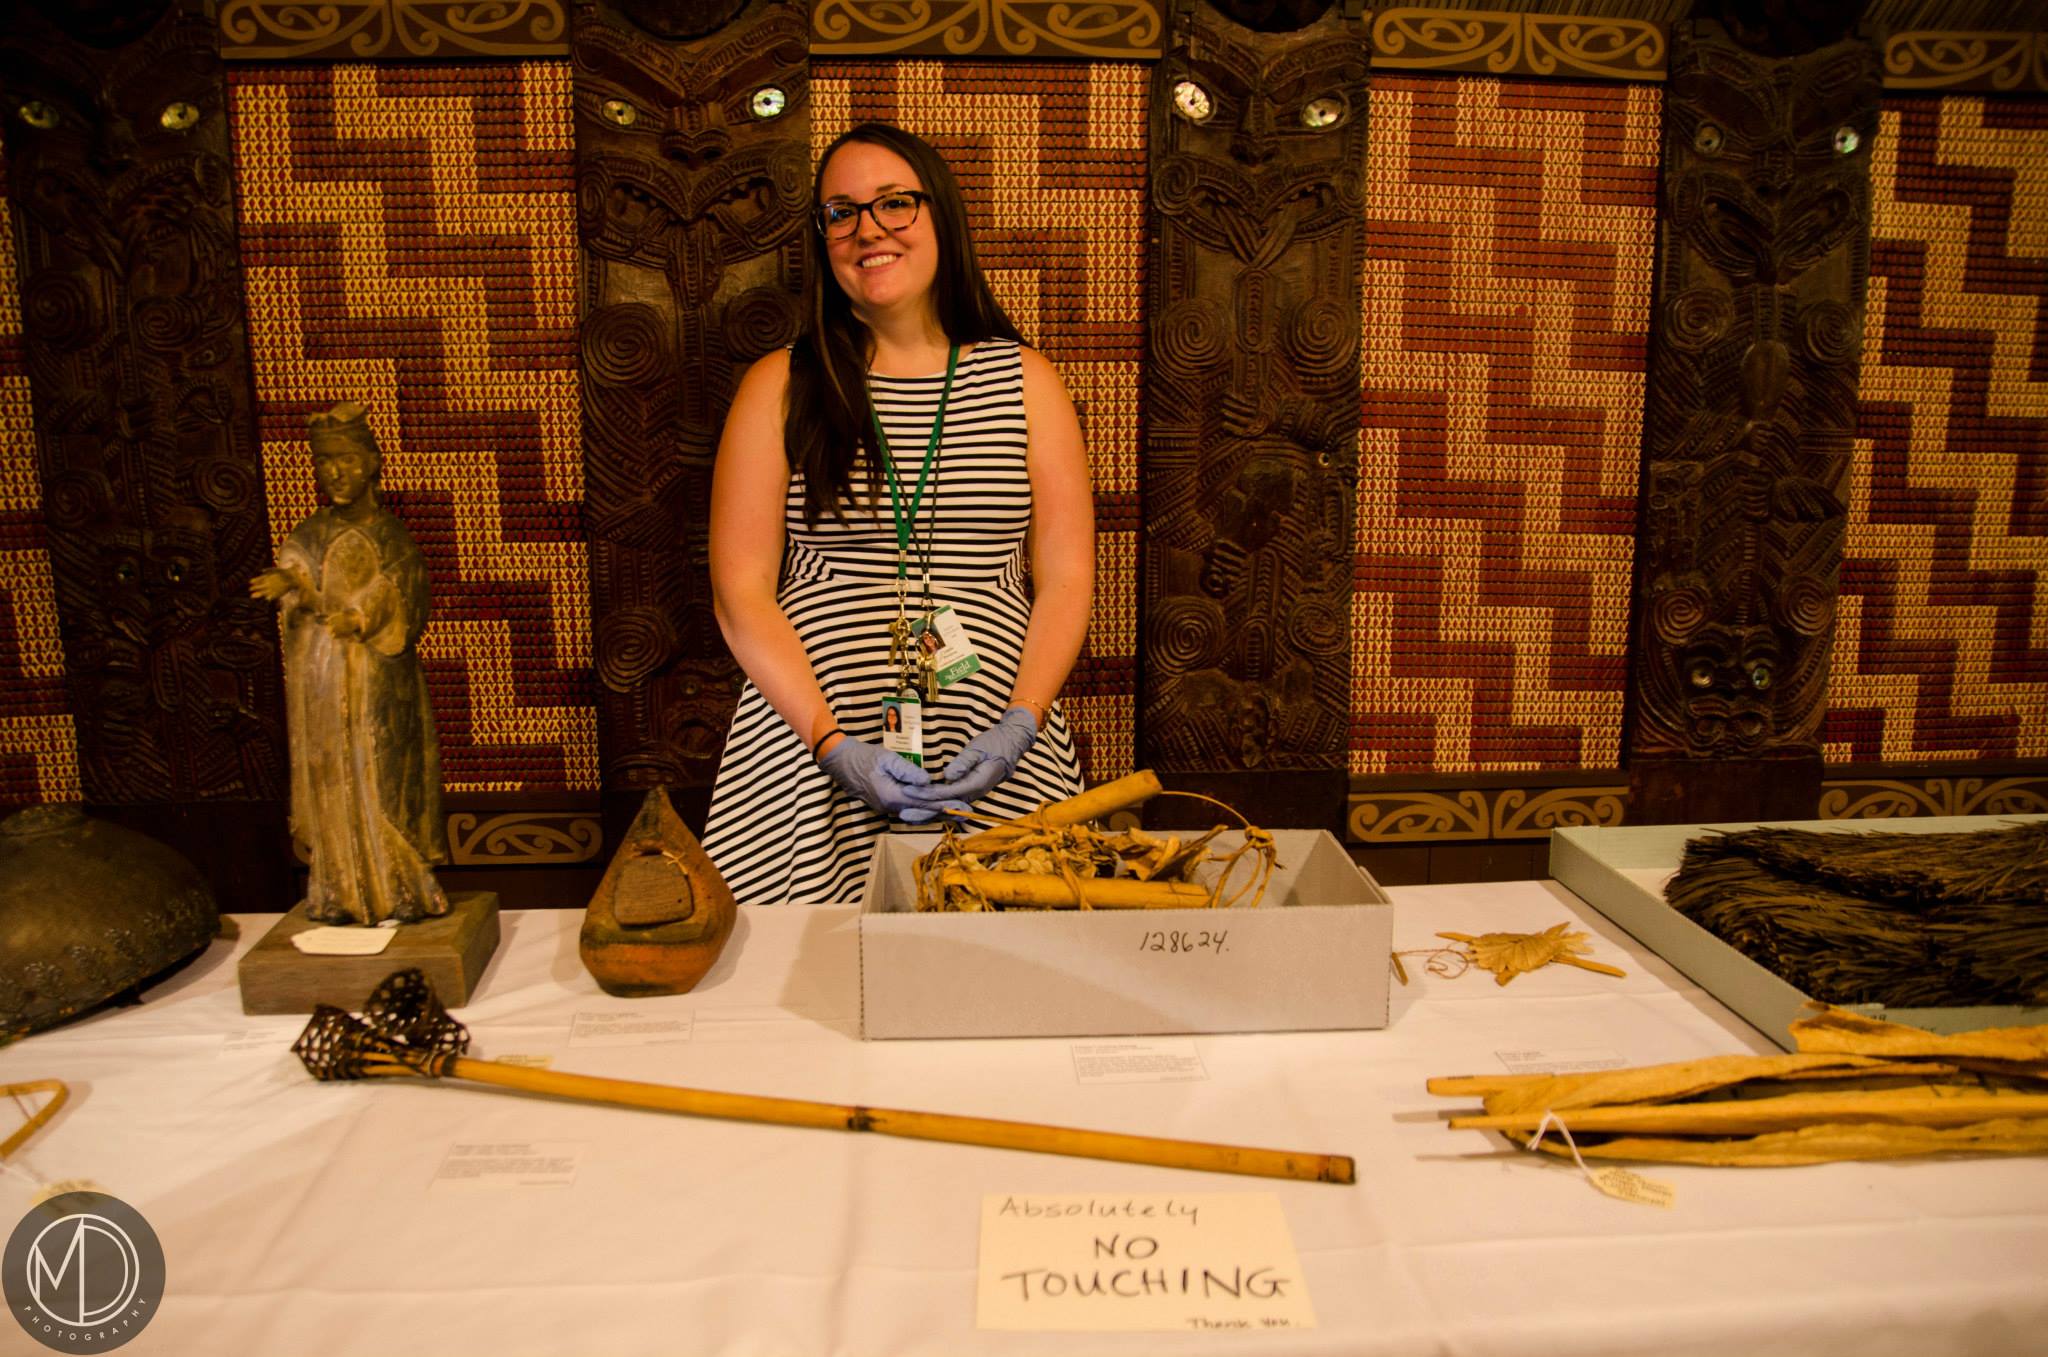 Liz staffing a table of artifacts inside Ruatepupuke II. (c) Field Museum of Natural History - CC BY-NC 4.0